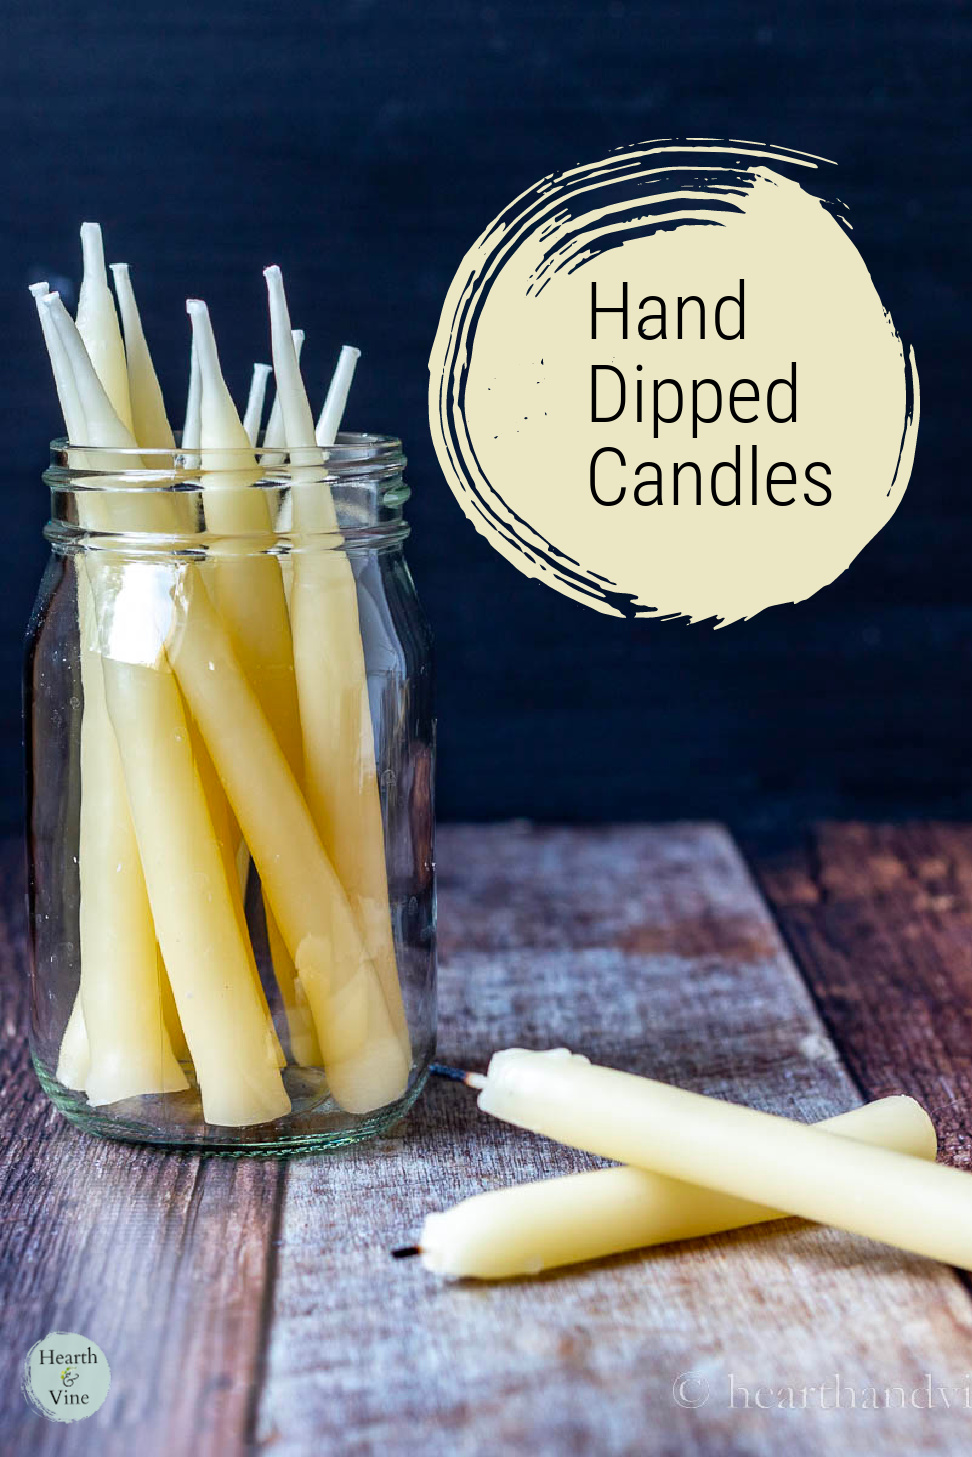 A jar of hand dipped beeswax candles and two on the table.